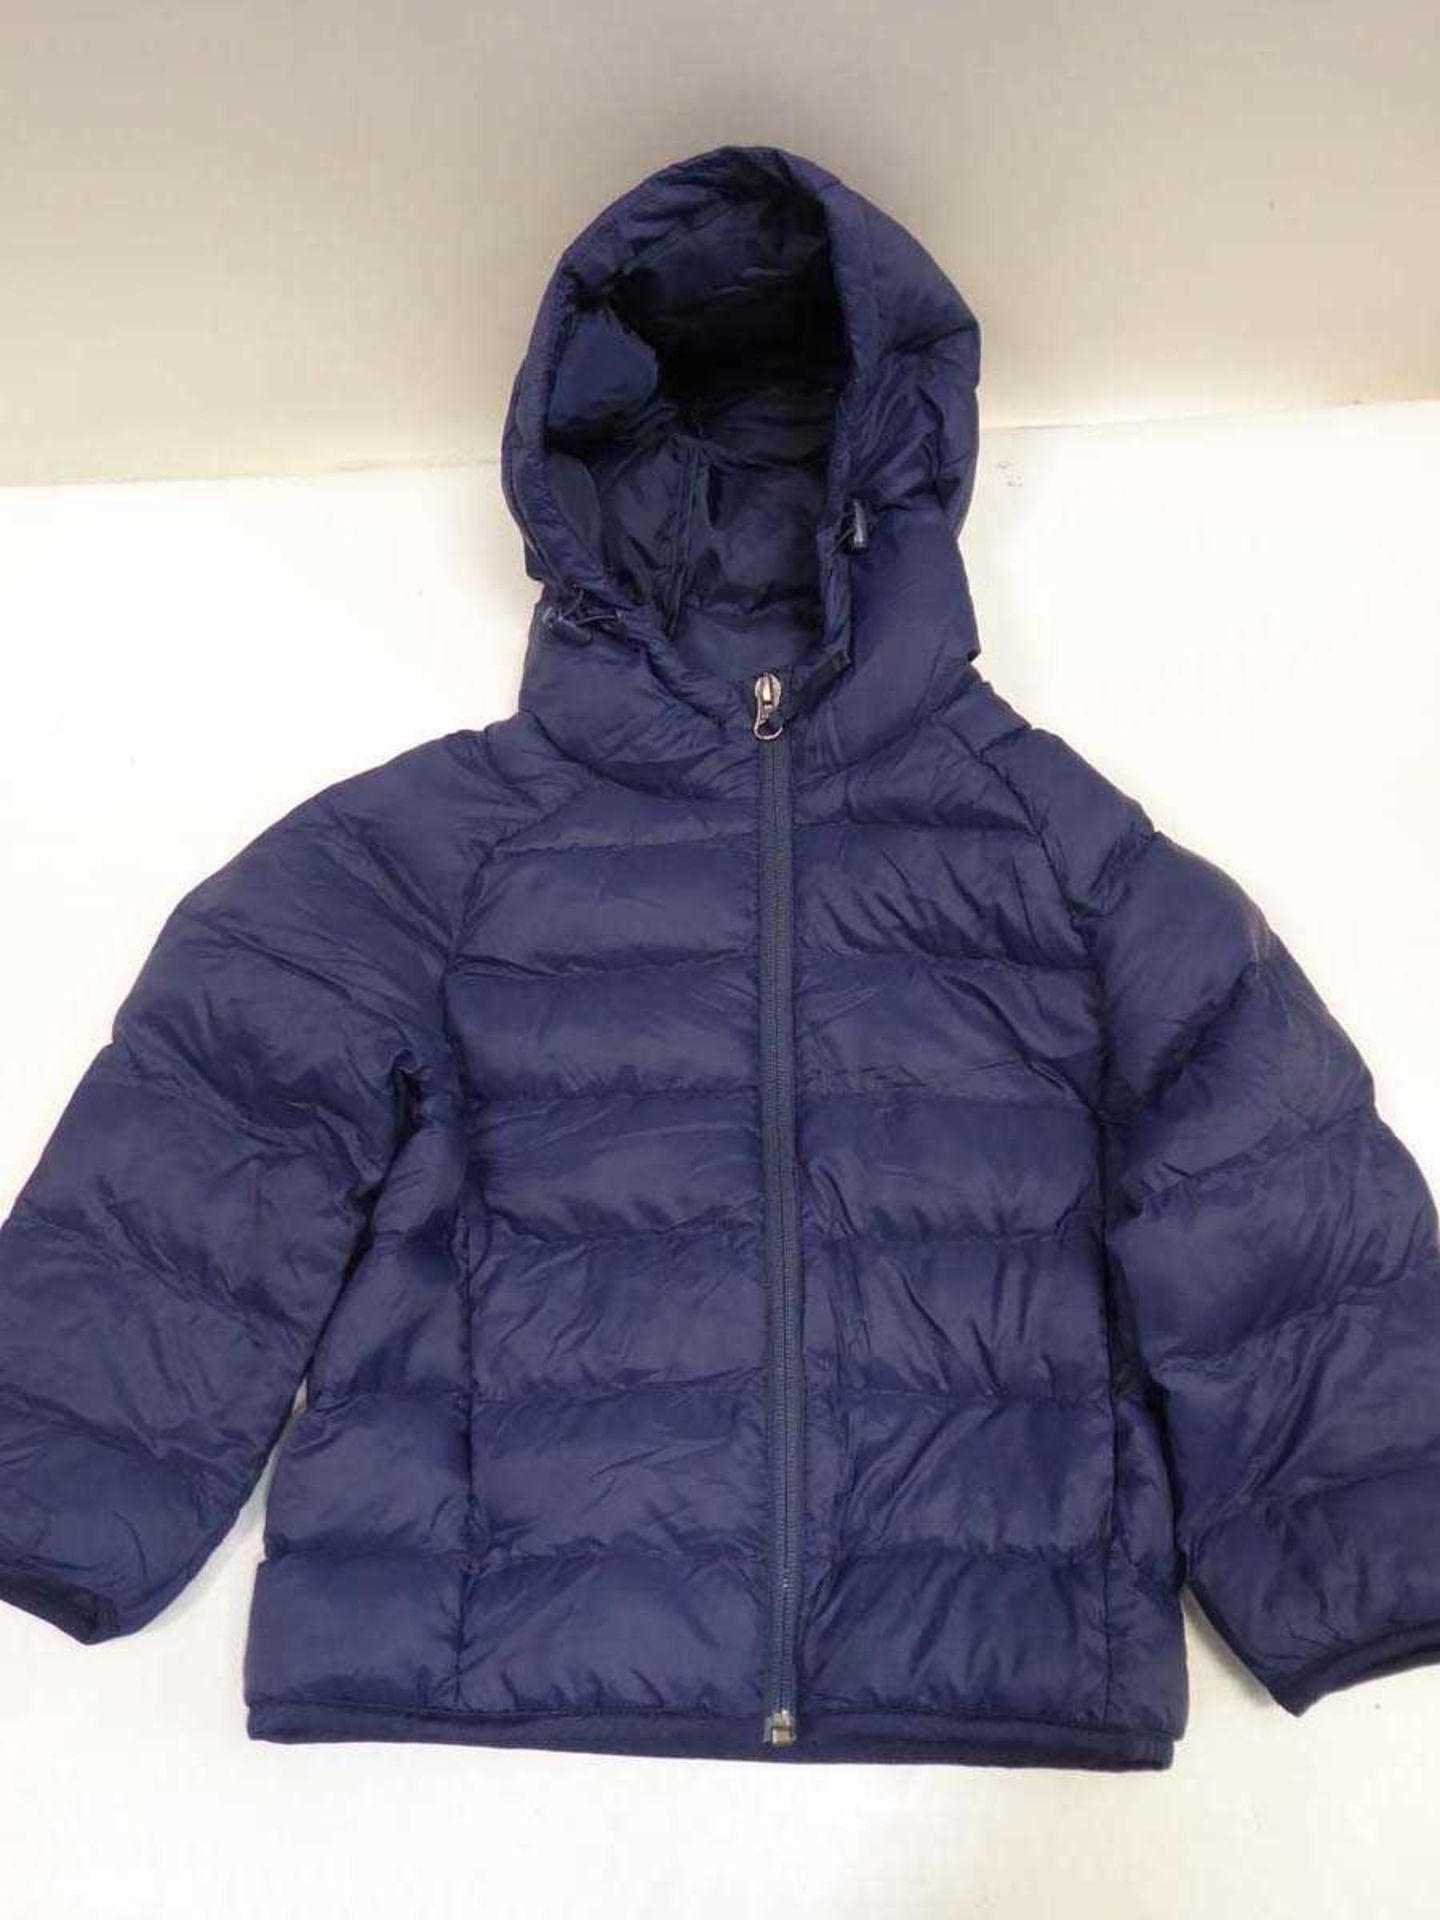 20 kids 32 Degree Heat youth jackets in mixed colours - Image 2 of 4